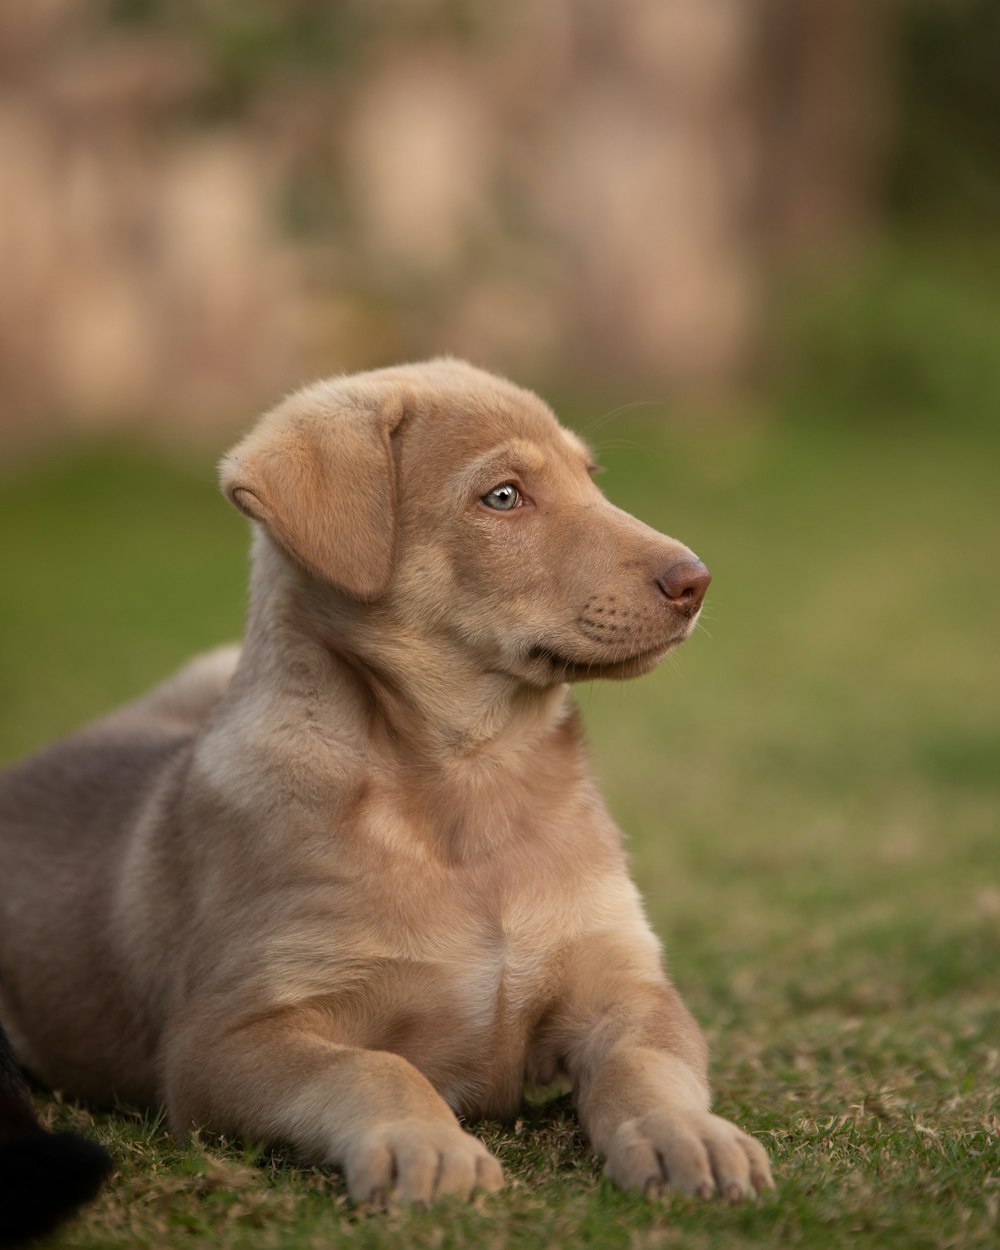 brown short coated puppy on green grass during daytime